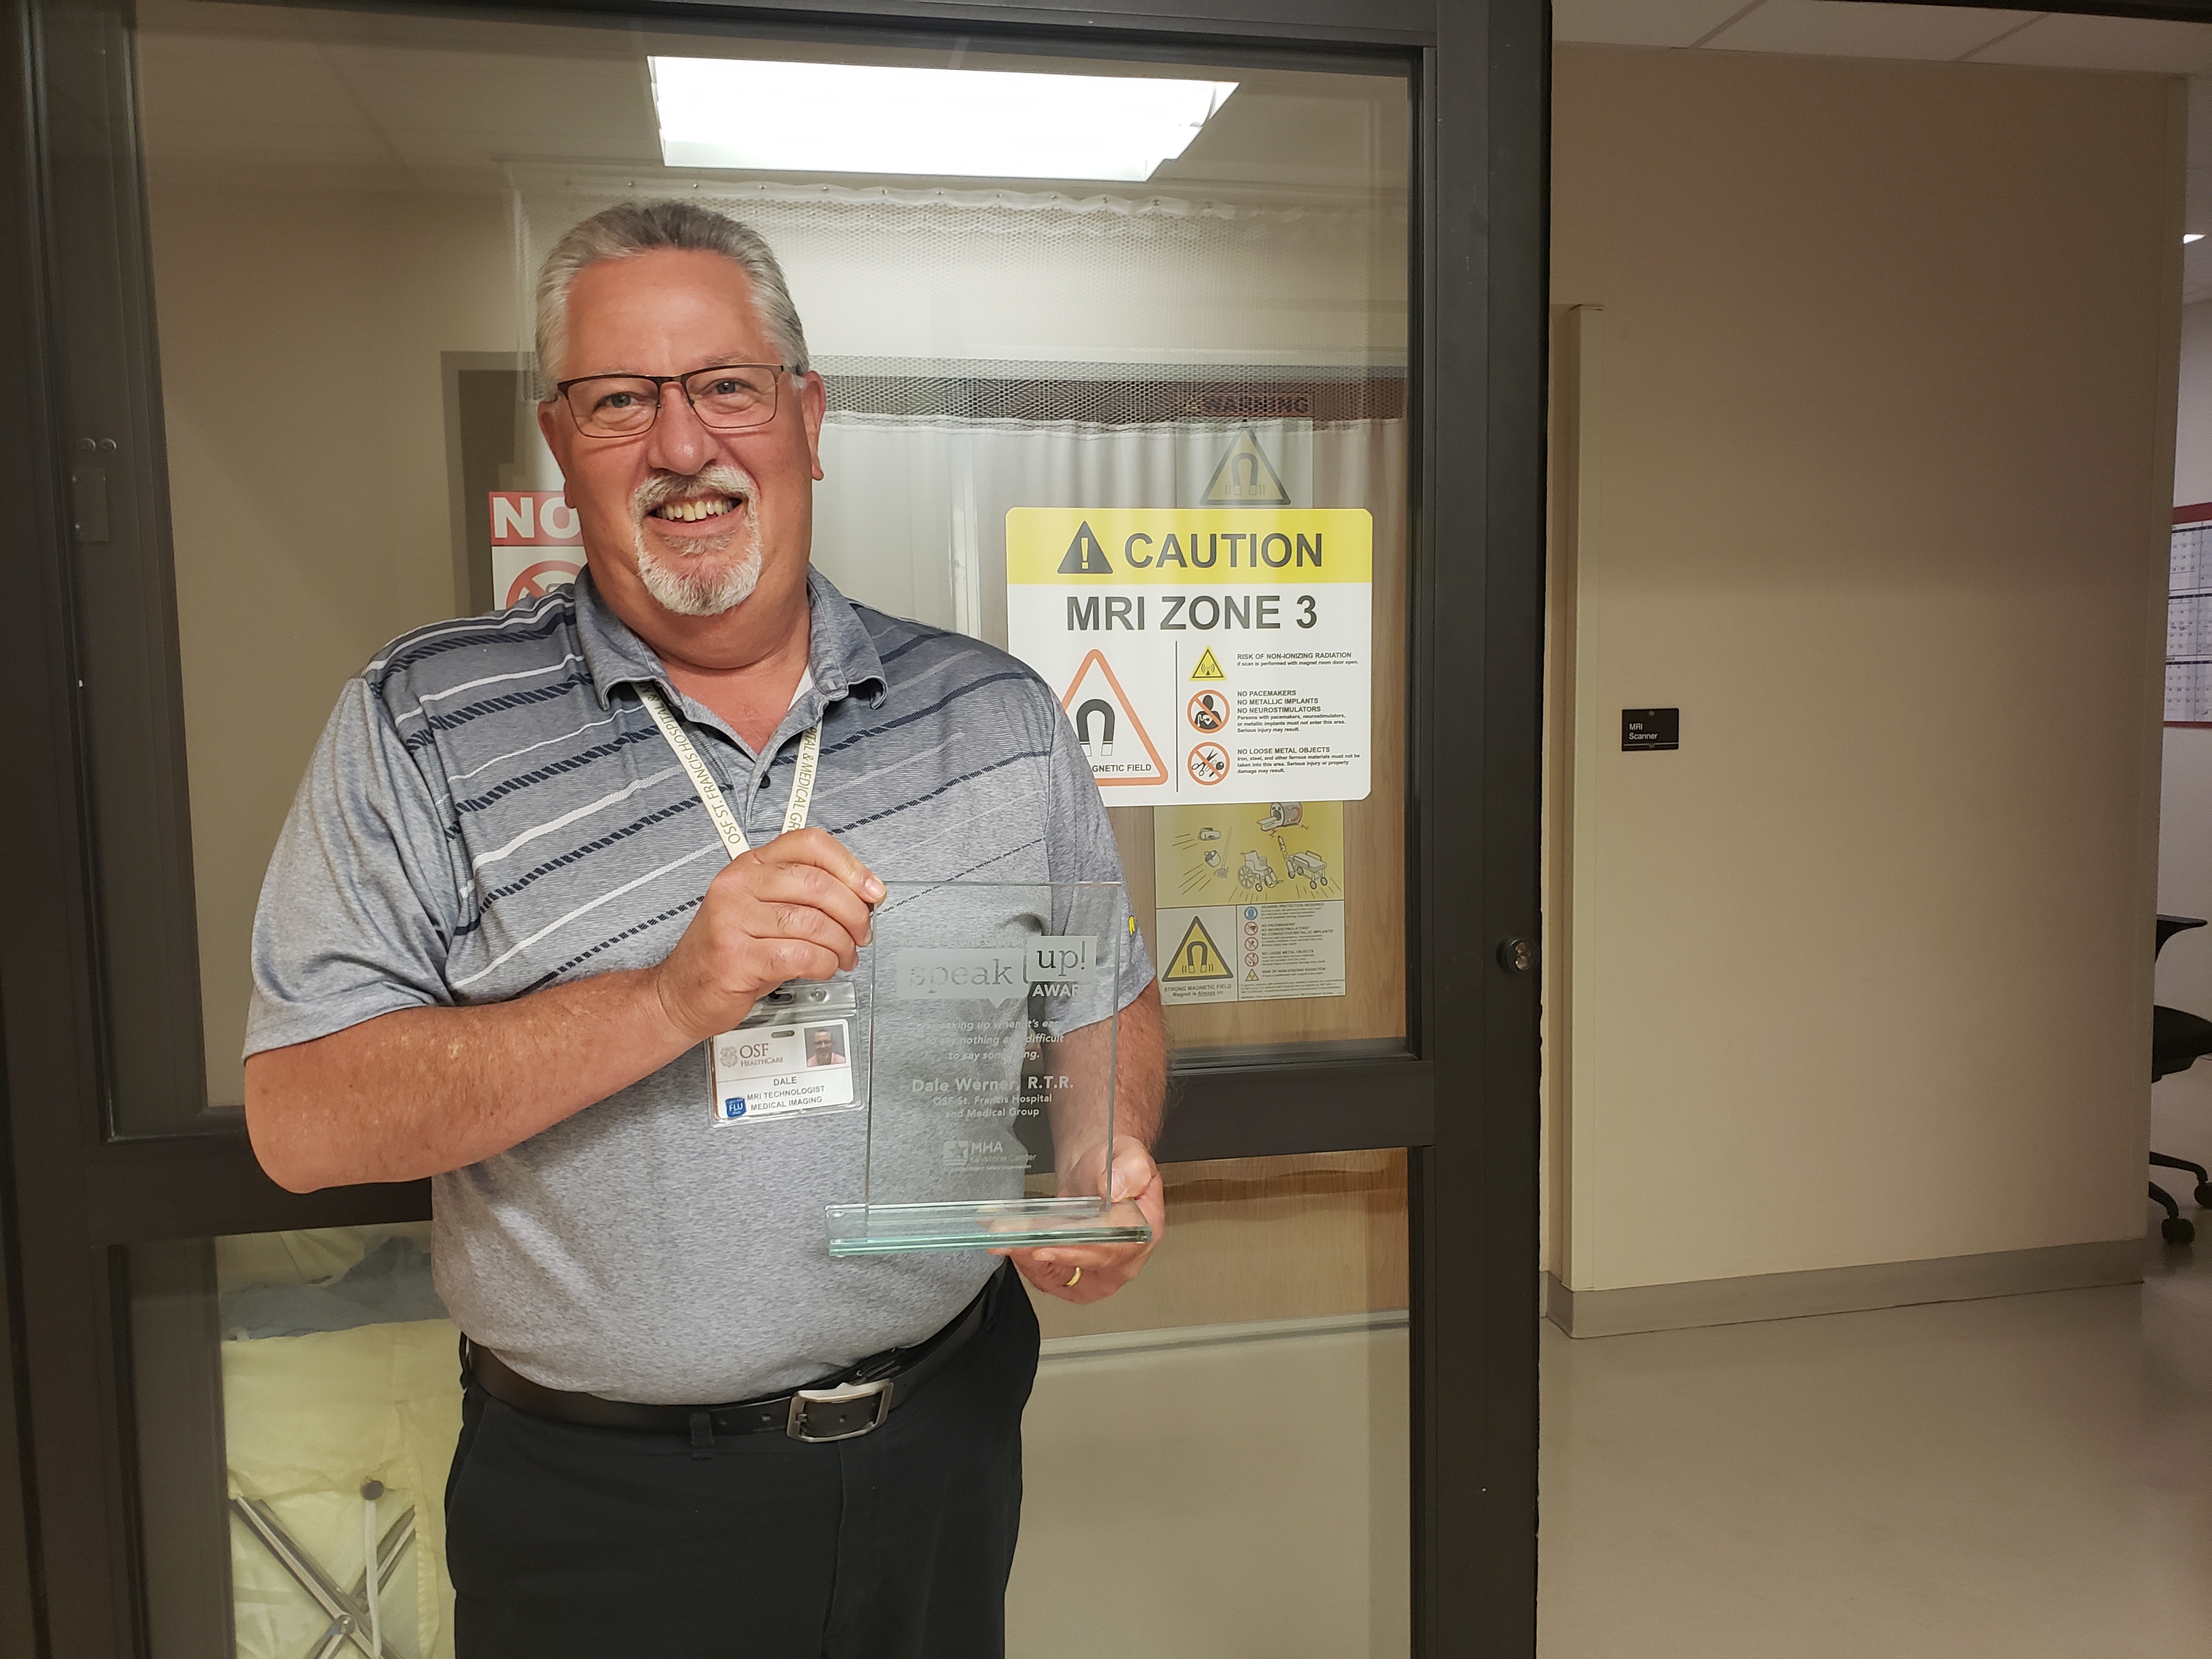 Dale Werner, RTR, OSF Healthcare St. Francis Hospital & Medical Group, received the MHA Keystone Center Speak-up! Award for fourth quarter of 2019 as well as the annual 2019 Speak-up! Award